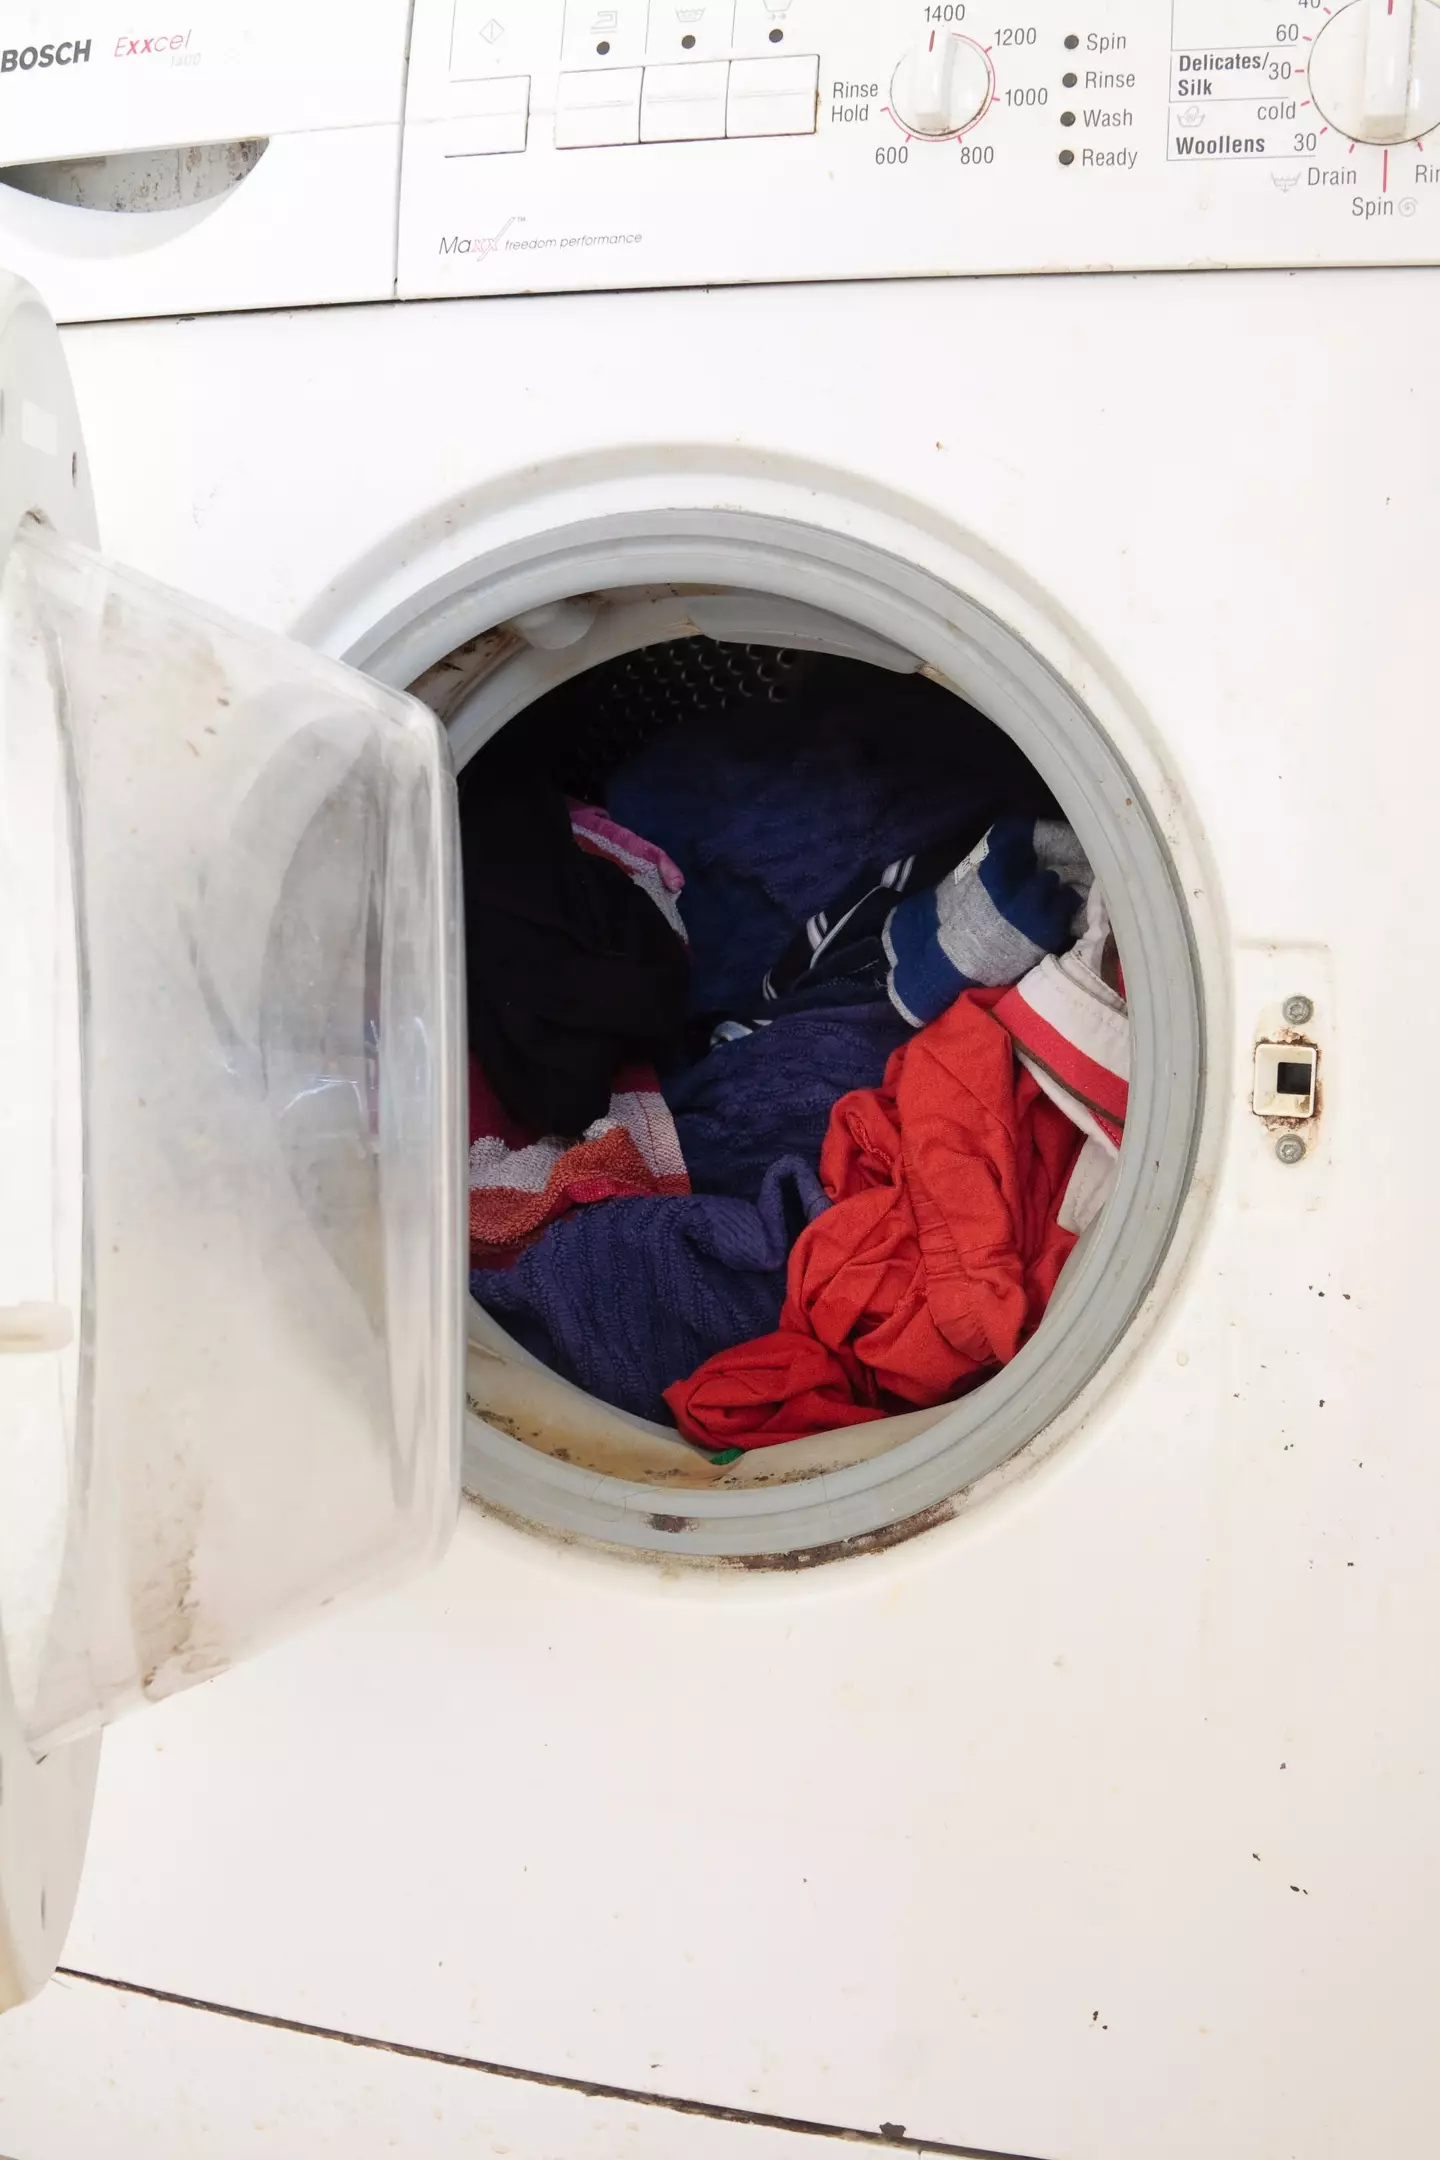 Washing your clothes at night may bag you a little bit of money.